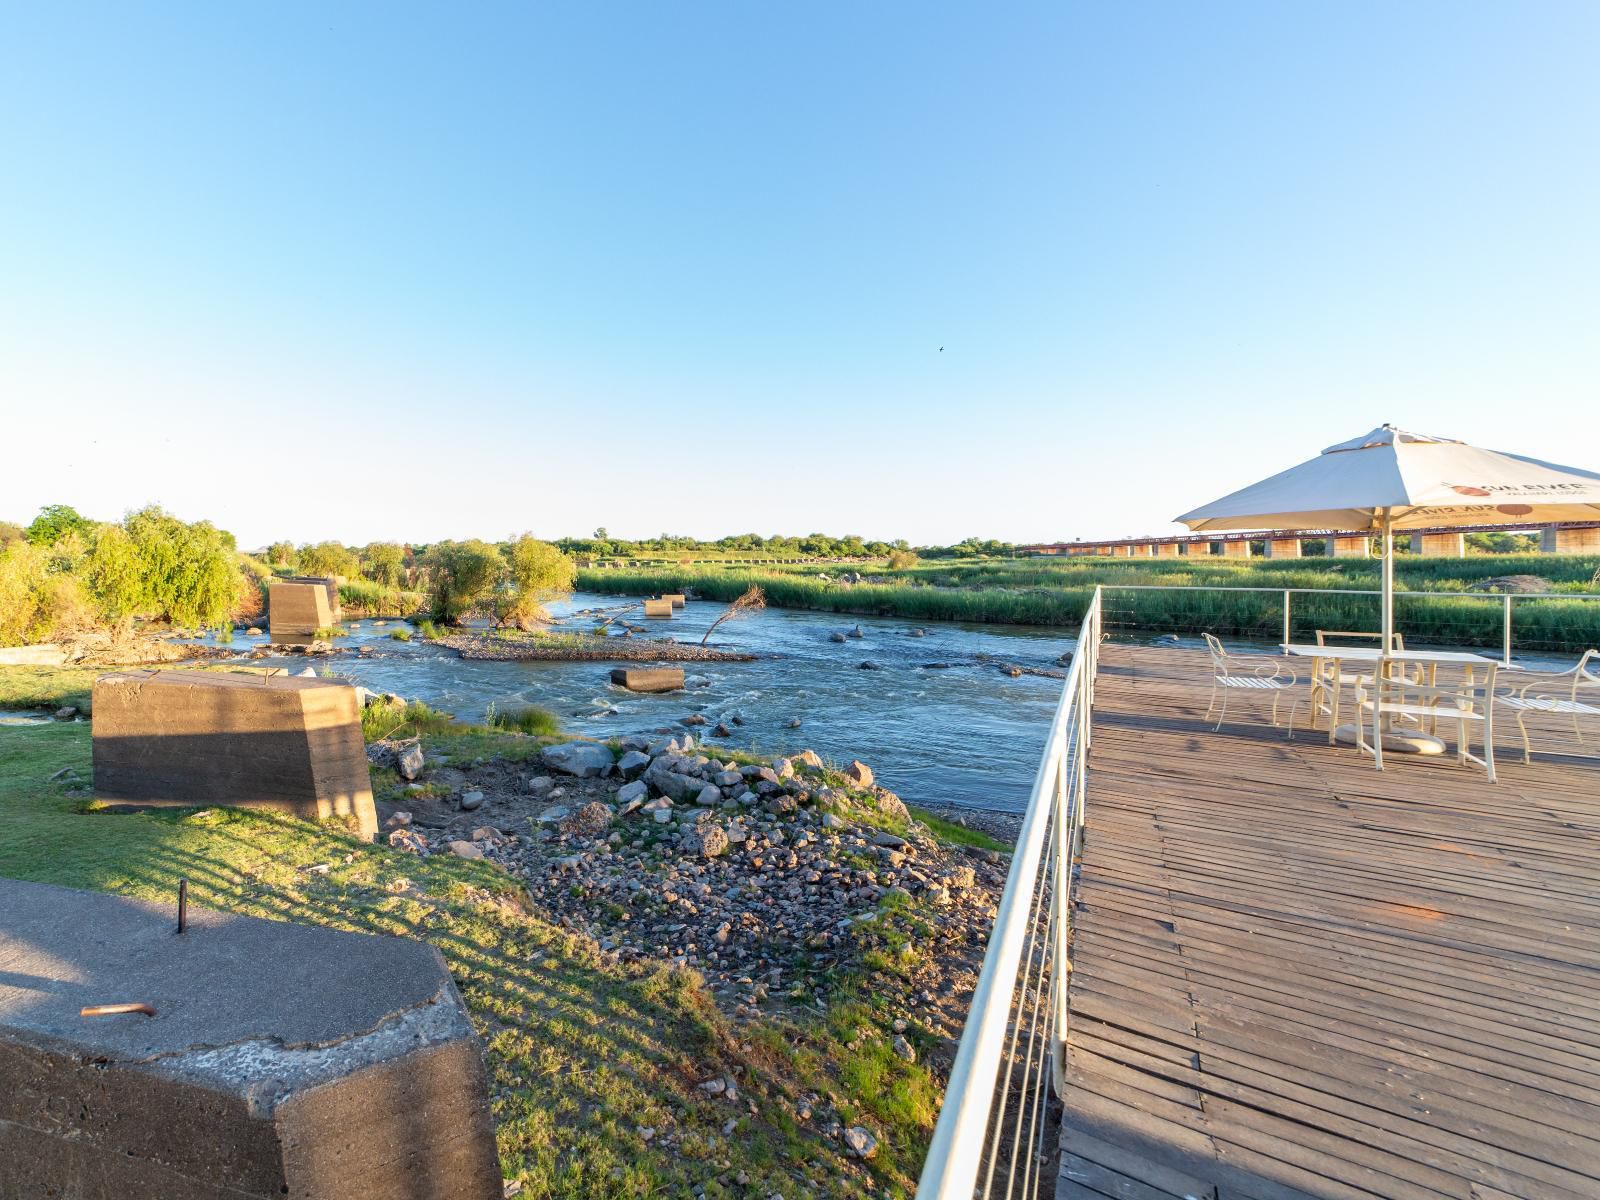 Sun River Kalahari Lodge Upington Northern Cape South Africa Complementary Colors, Bridge, Architecture, River, Nature, Waters